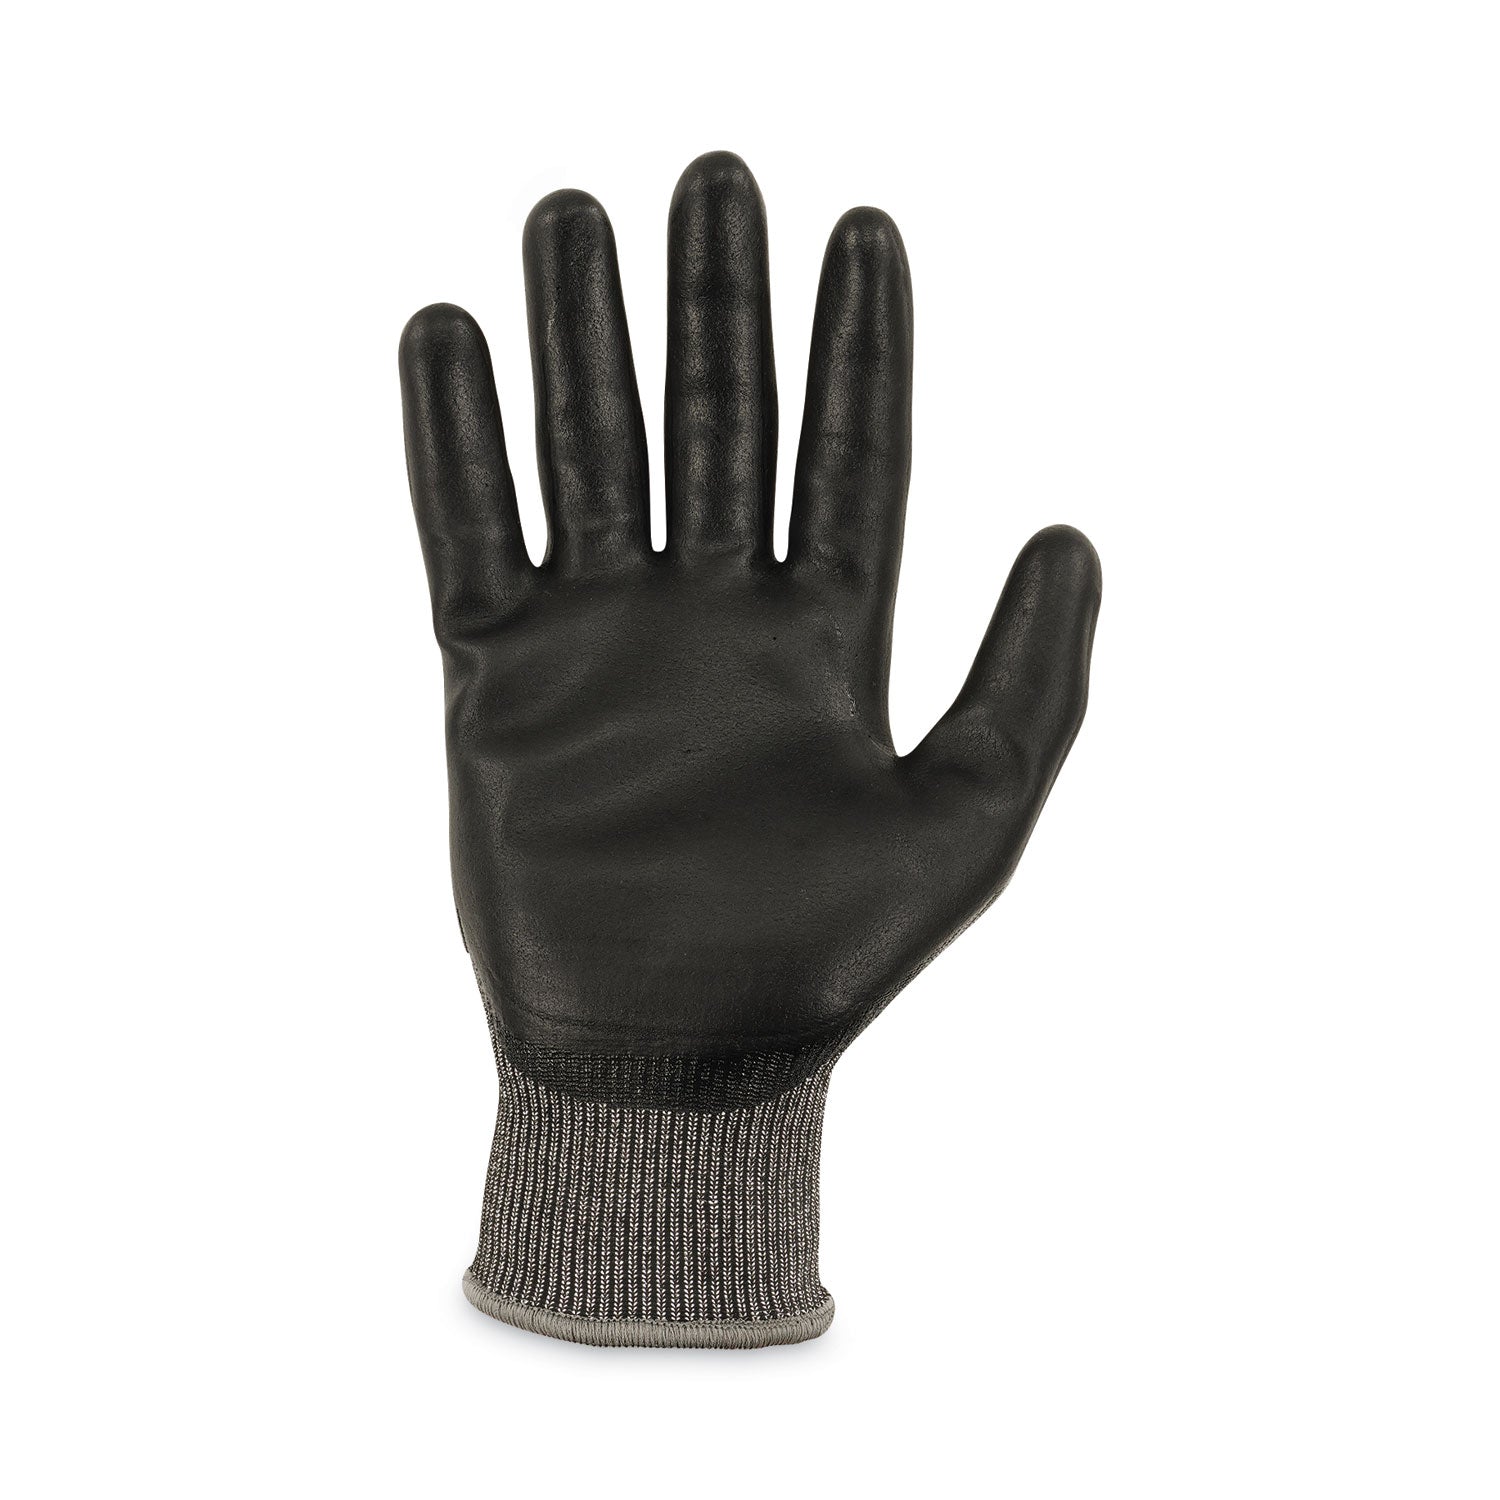 proflex-7072-ansi-a7-nitrile-coated-cr-gloves-gray-large-12-pairs-pack-ships-in-1-3-business-days_ego10304 - 5